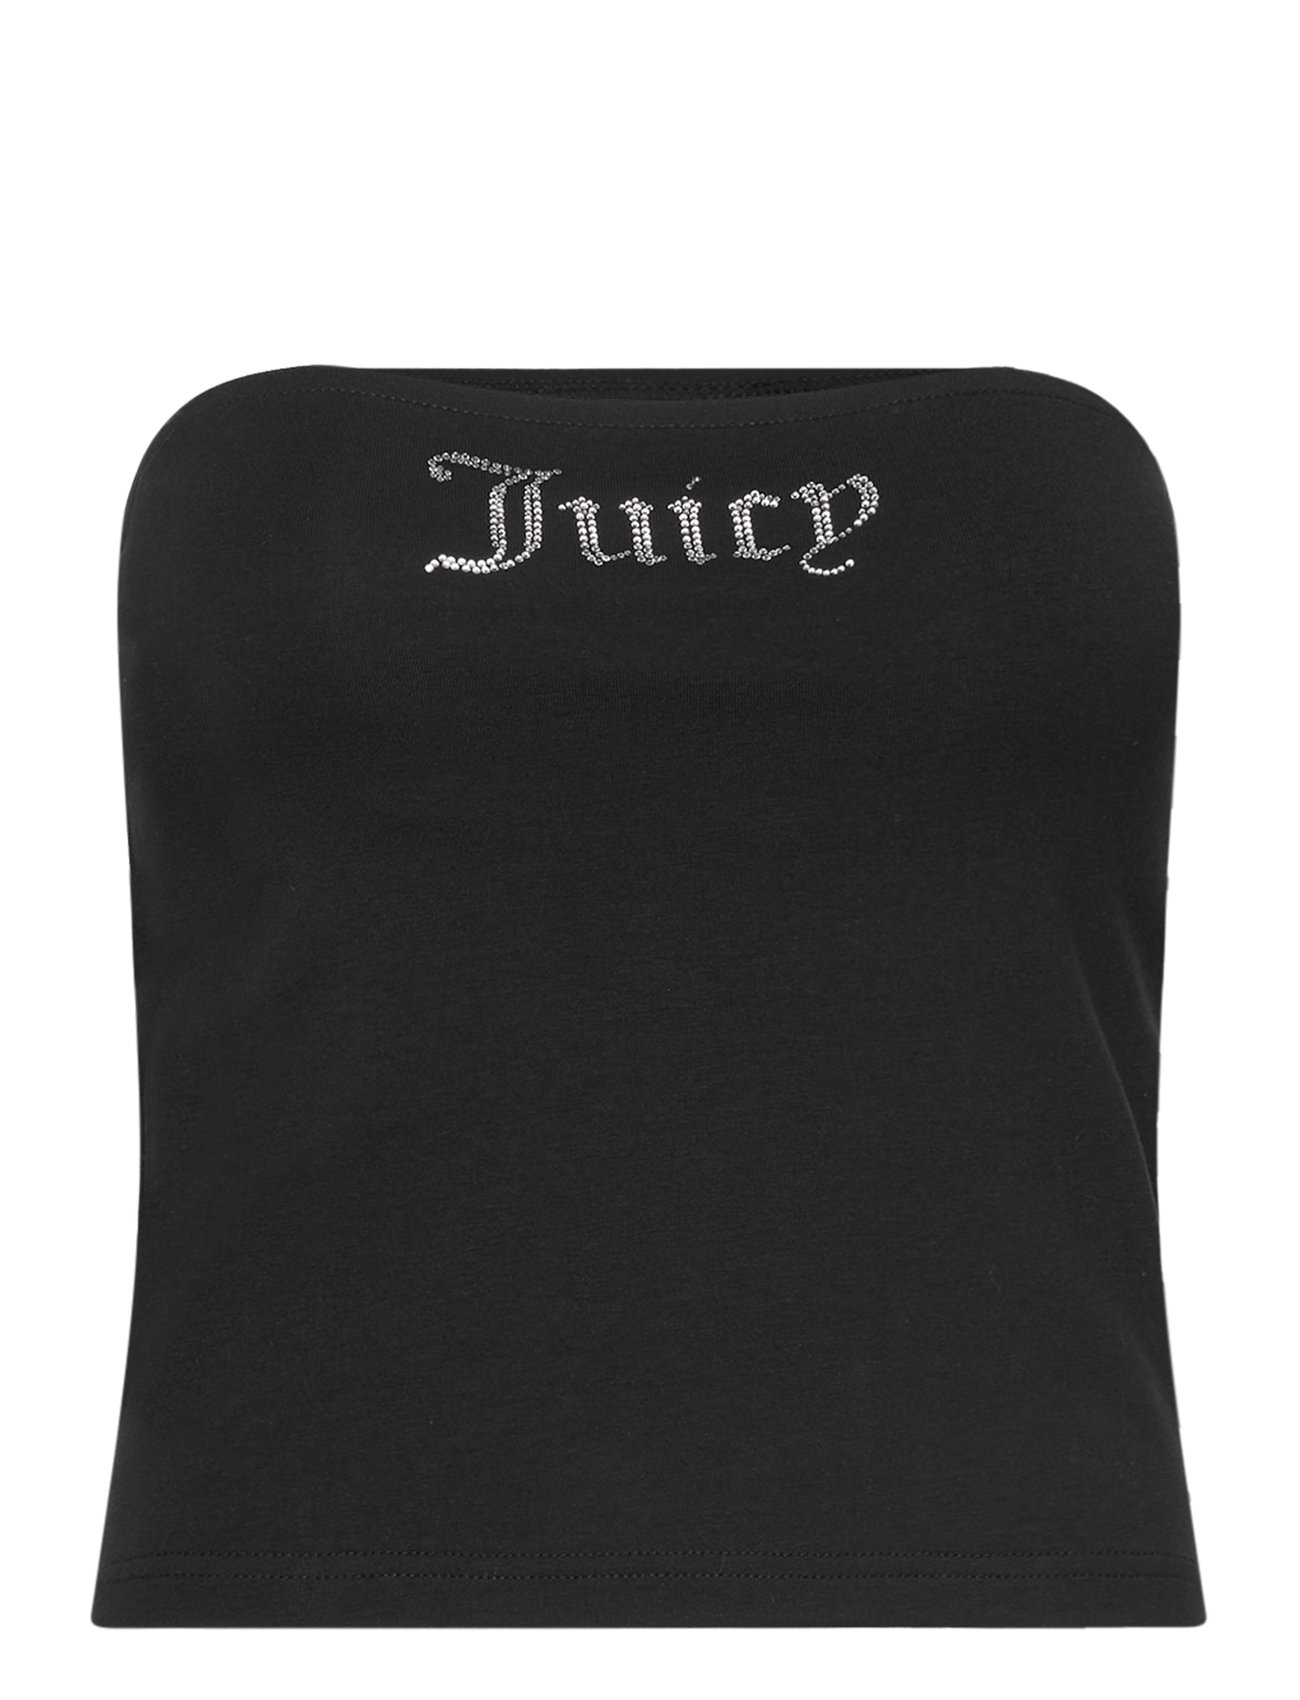 Jersey Babey Bandeau Top Tops T-shirts & Tops Sleeveless Black Juicy Couture